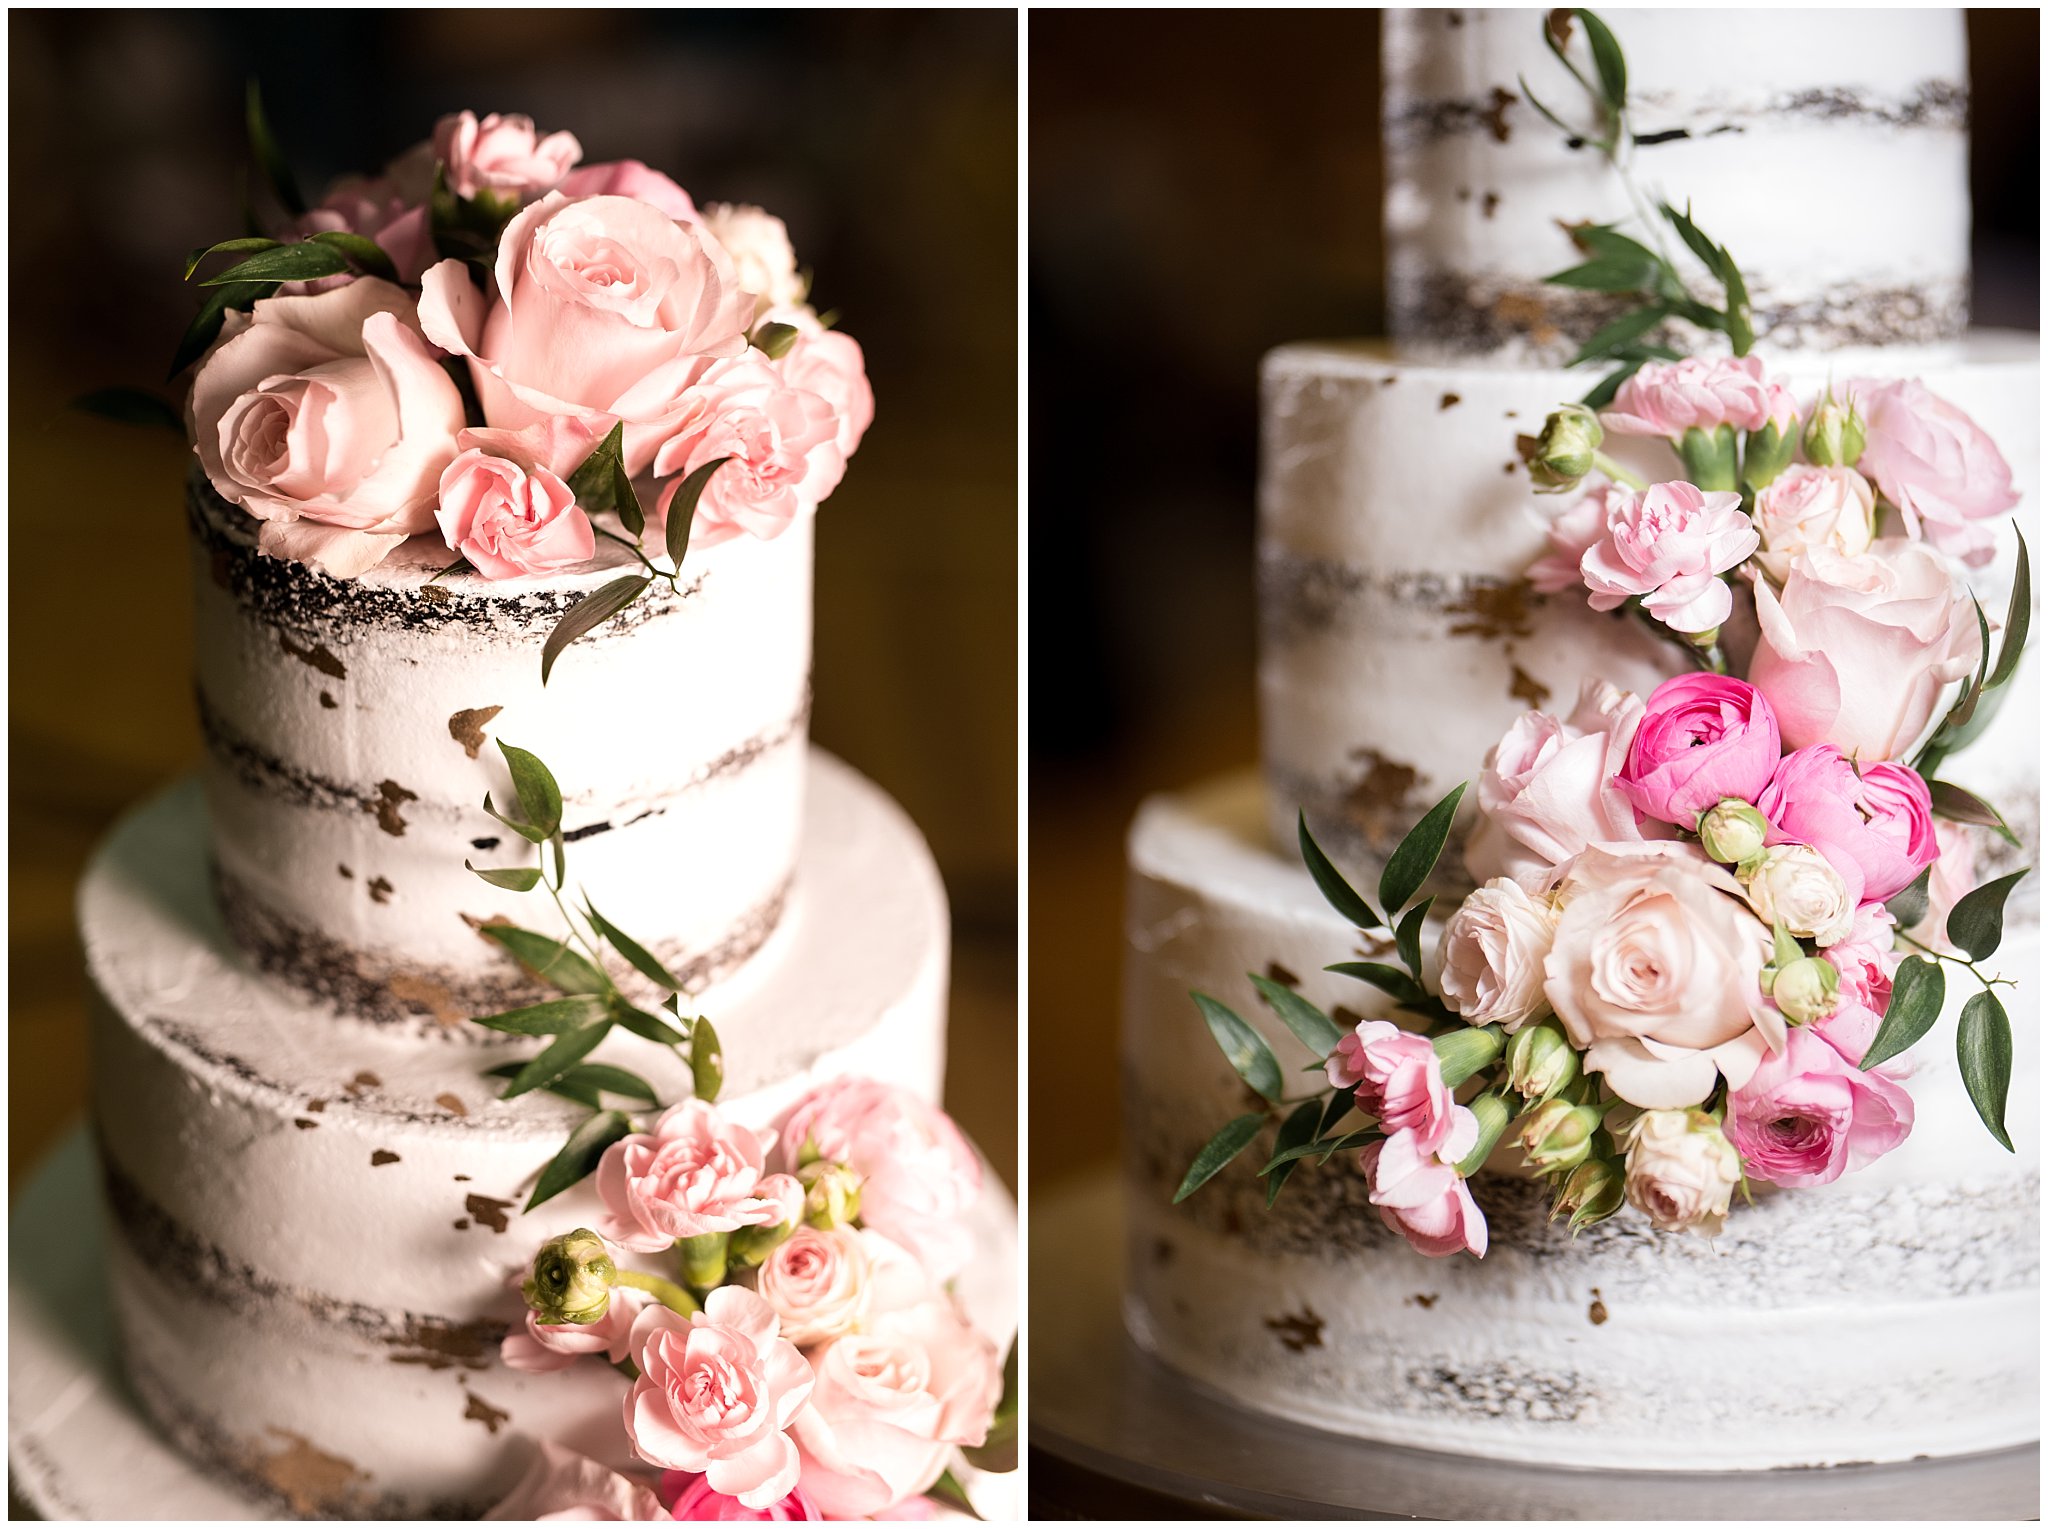 Gold flaked cookies and cream wedding cake with pink florals | Ogden Temple Winter Wedding | Emerald Green and Pink Wedding | Jessie and Dallin Photography